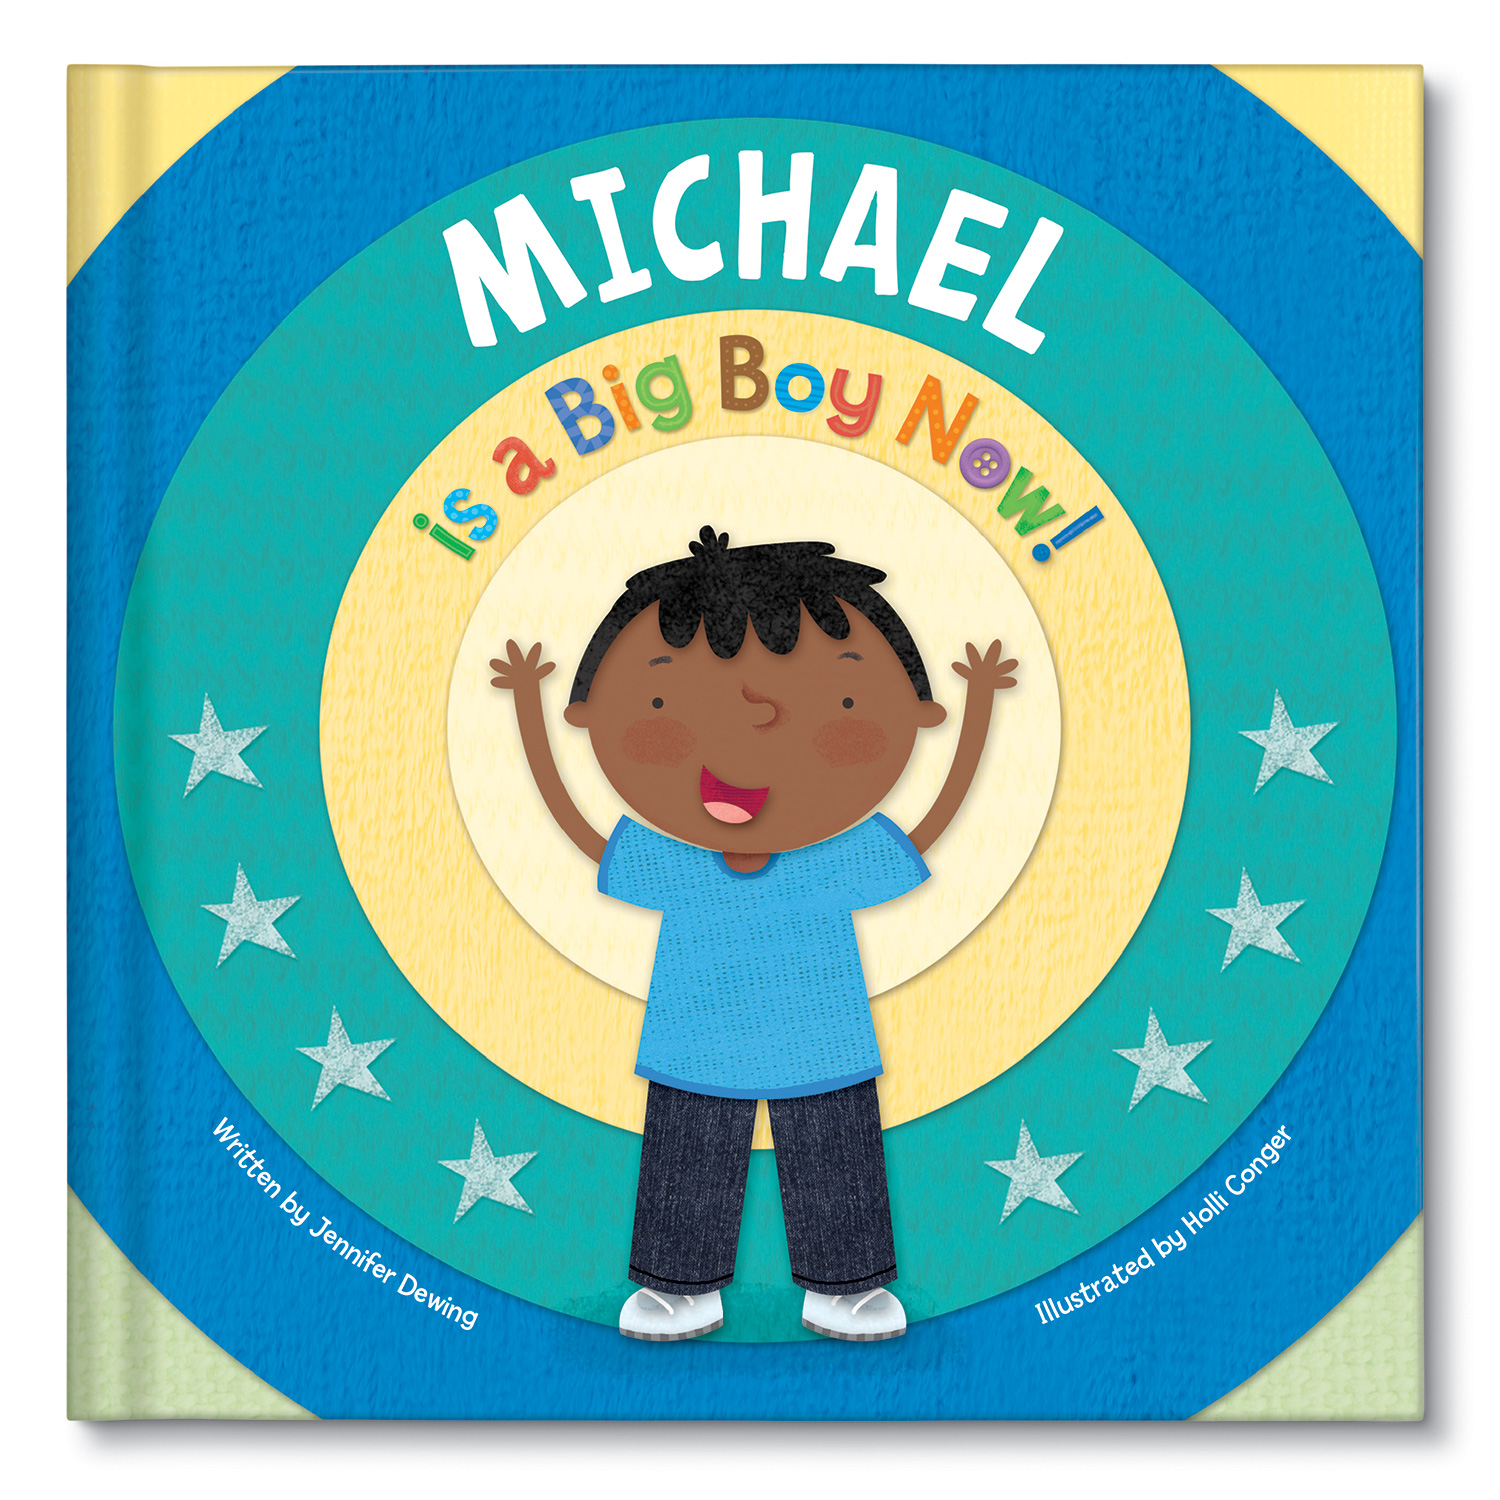 I See Me! gives parents and toddlers a helping hand in making the transition from baby to big kid with its new personalized storybooks, "I’m a Big Boy Now!" and "I’m a Big Girl Now!"